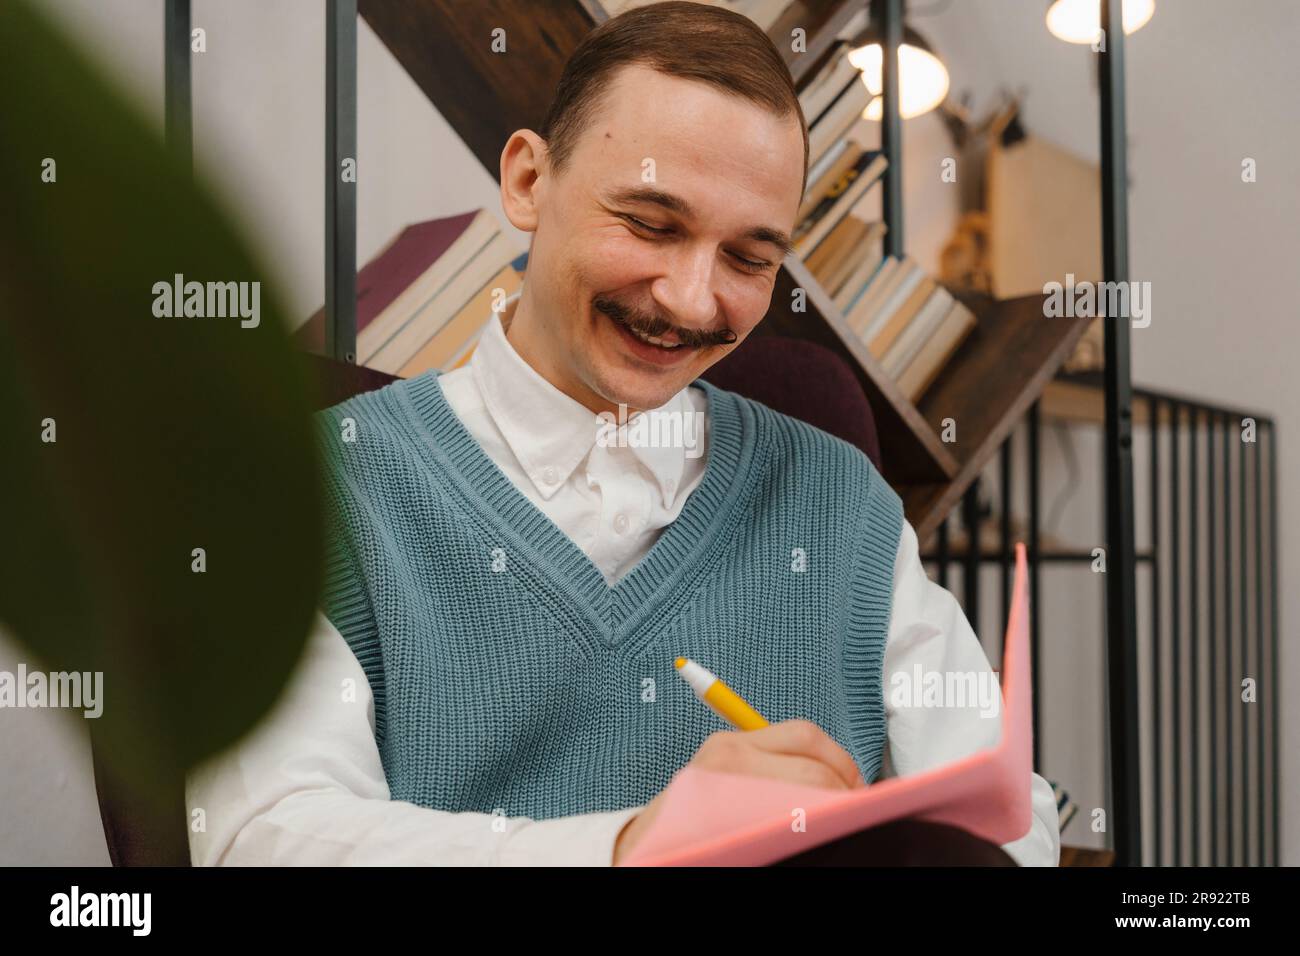 Smiling man with moustache taking notes sitting in studio Stock Photo